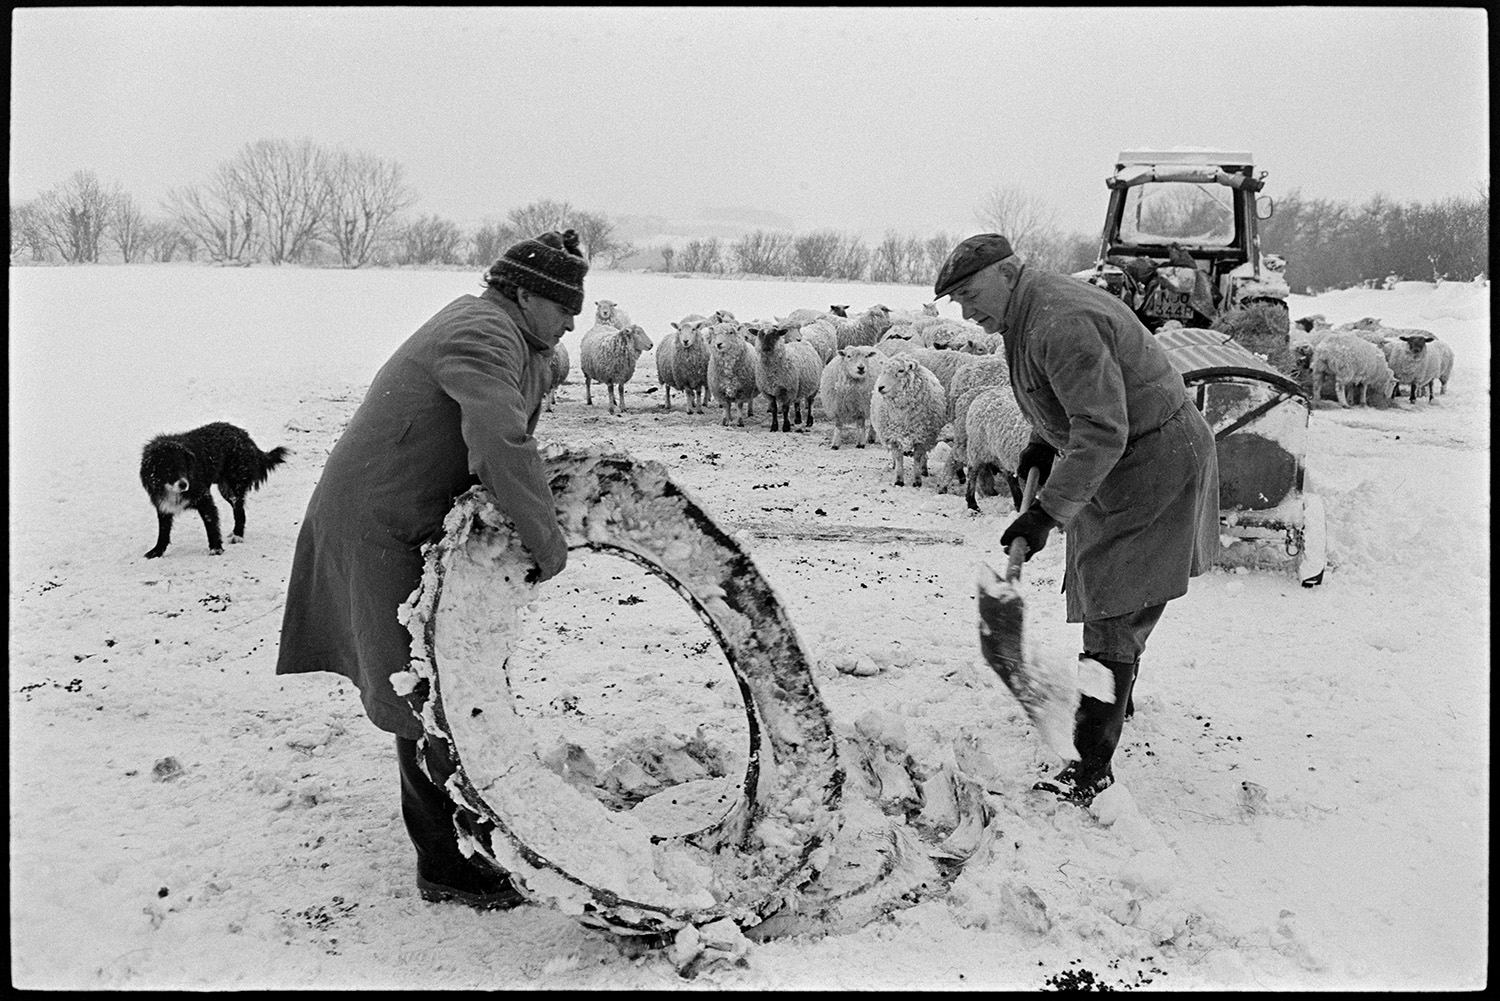 Snow, feeding hay to sheep after blizzard. 
[Alf Pugsley and Phillip George feeding hay to sheep in a snow covered field at Lower Langham, Dolton. They are digging out a tyre from the snow which has been cut in half and used as a trough. A dog, tractor and flock of sheep are in the background.]